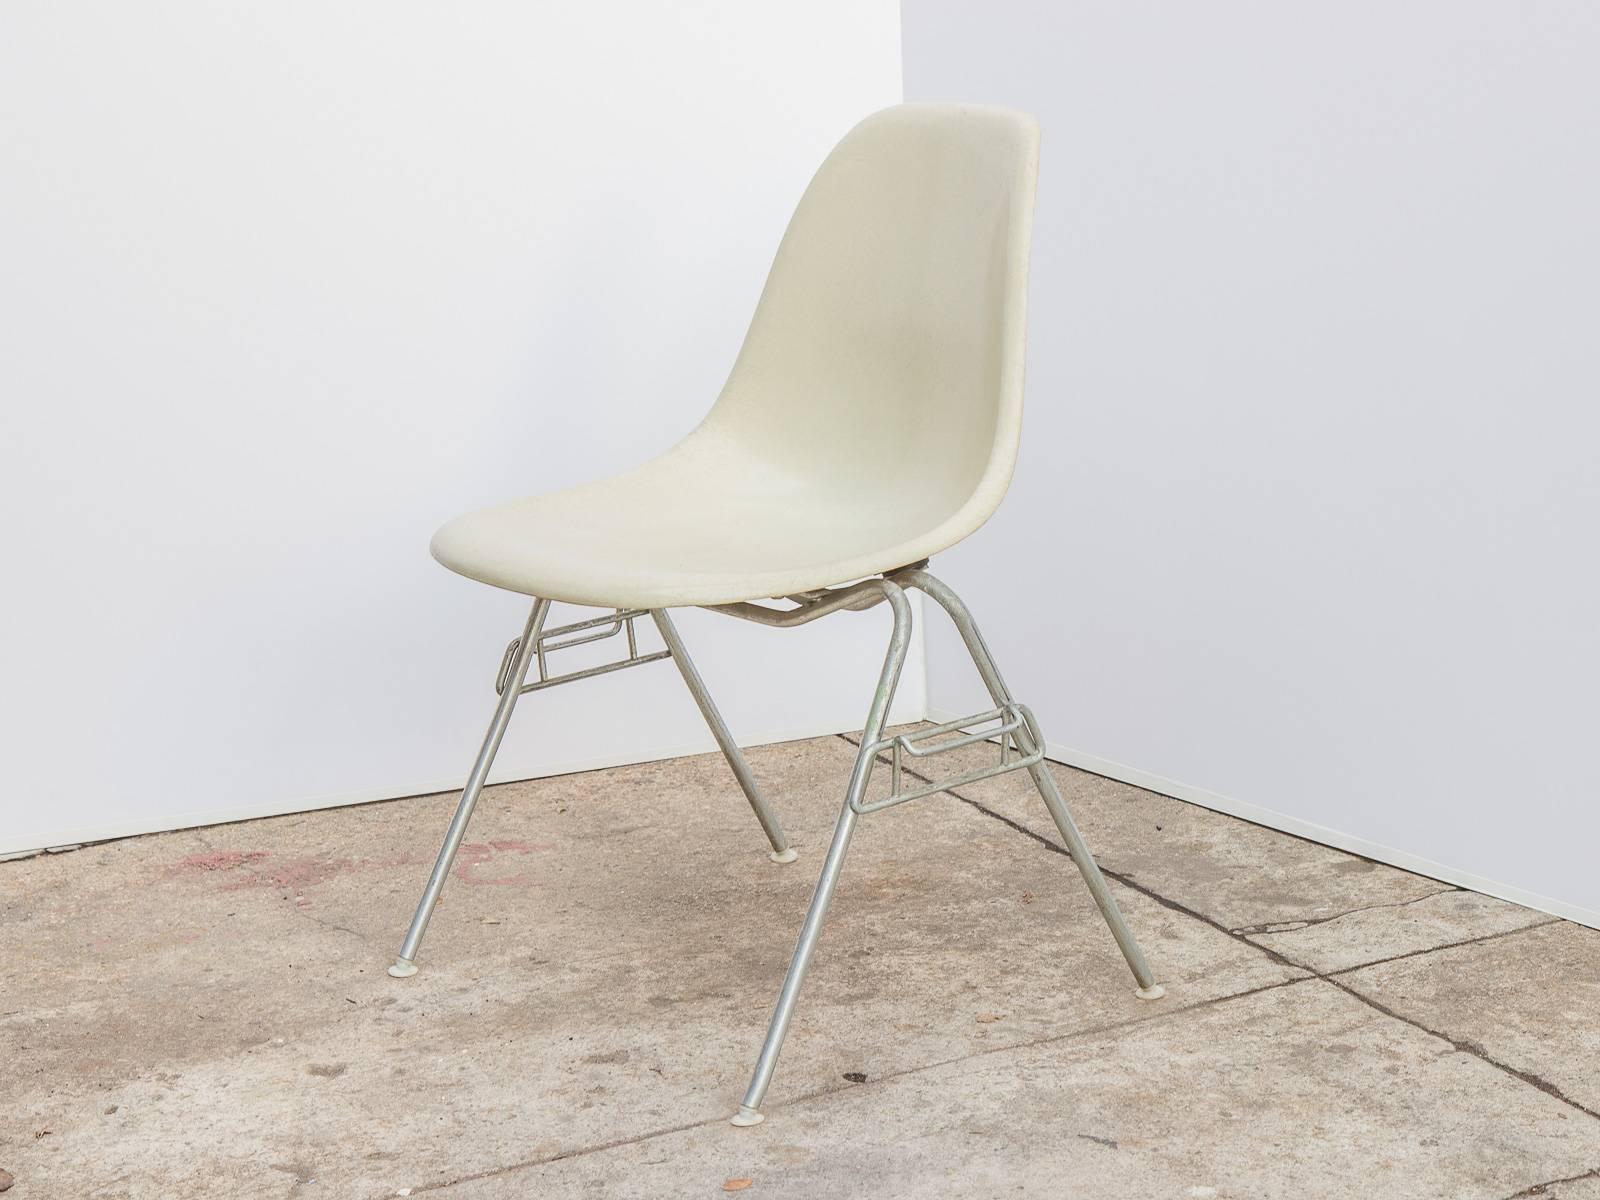 Original 1960s molded fiberglass parchment white shell chairs on stacking base, designed by Charles and Ray Eames for Herman Miller. Gleaming shells are in original condition, each with a distinct thready texture.  Shown here mounted on stacking